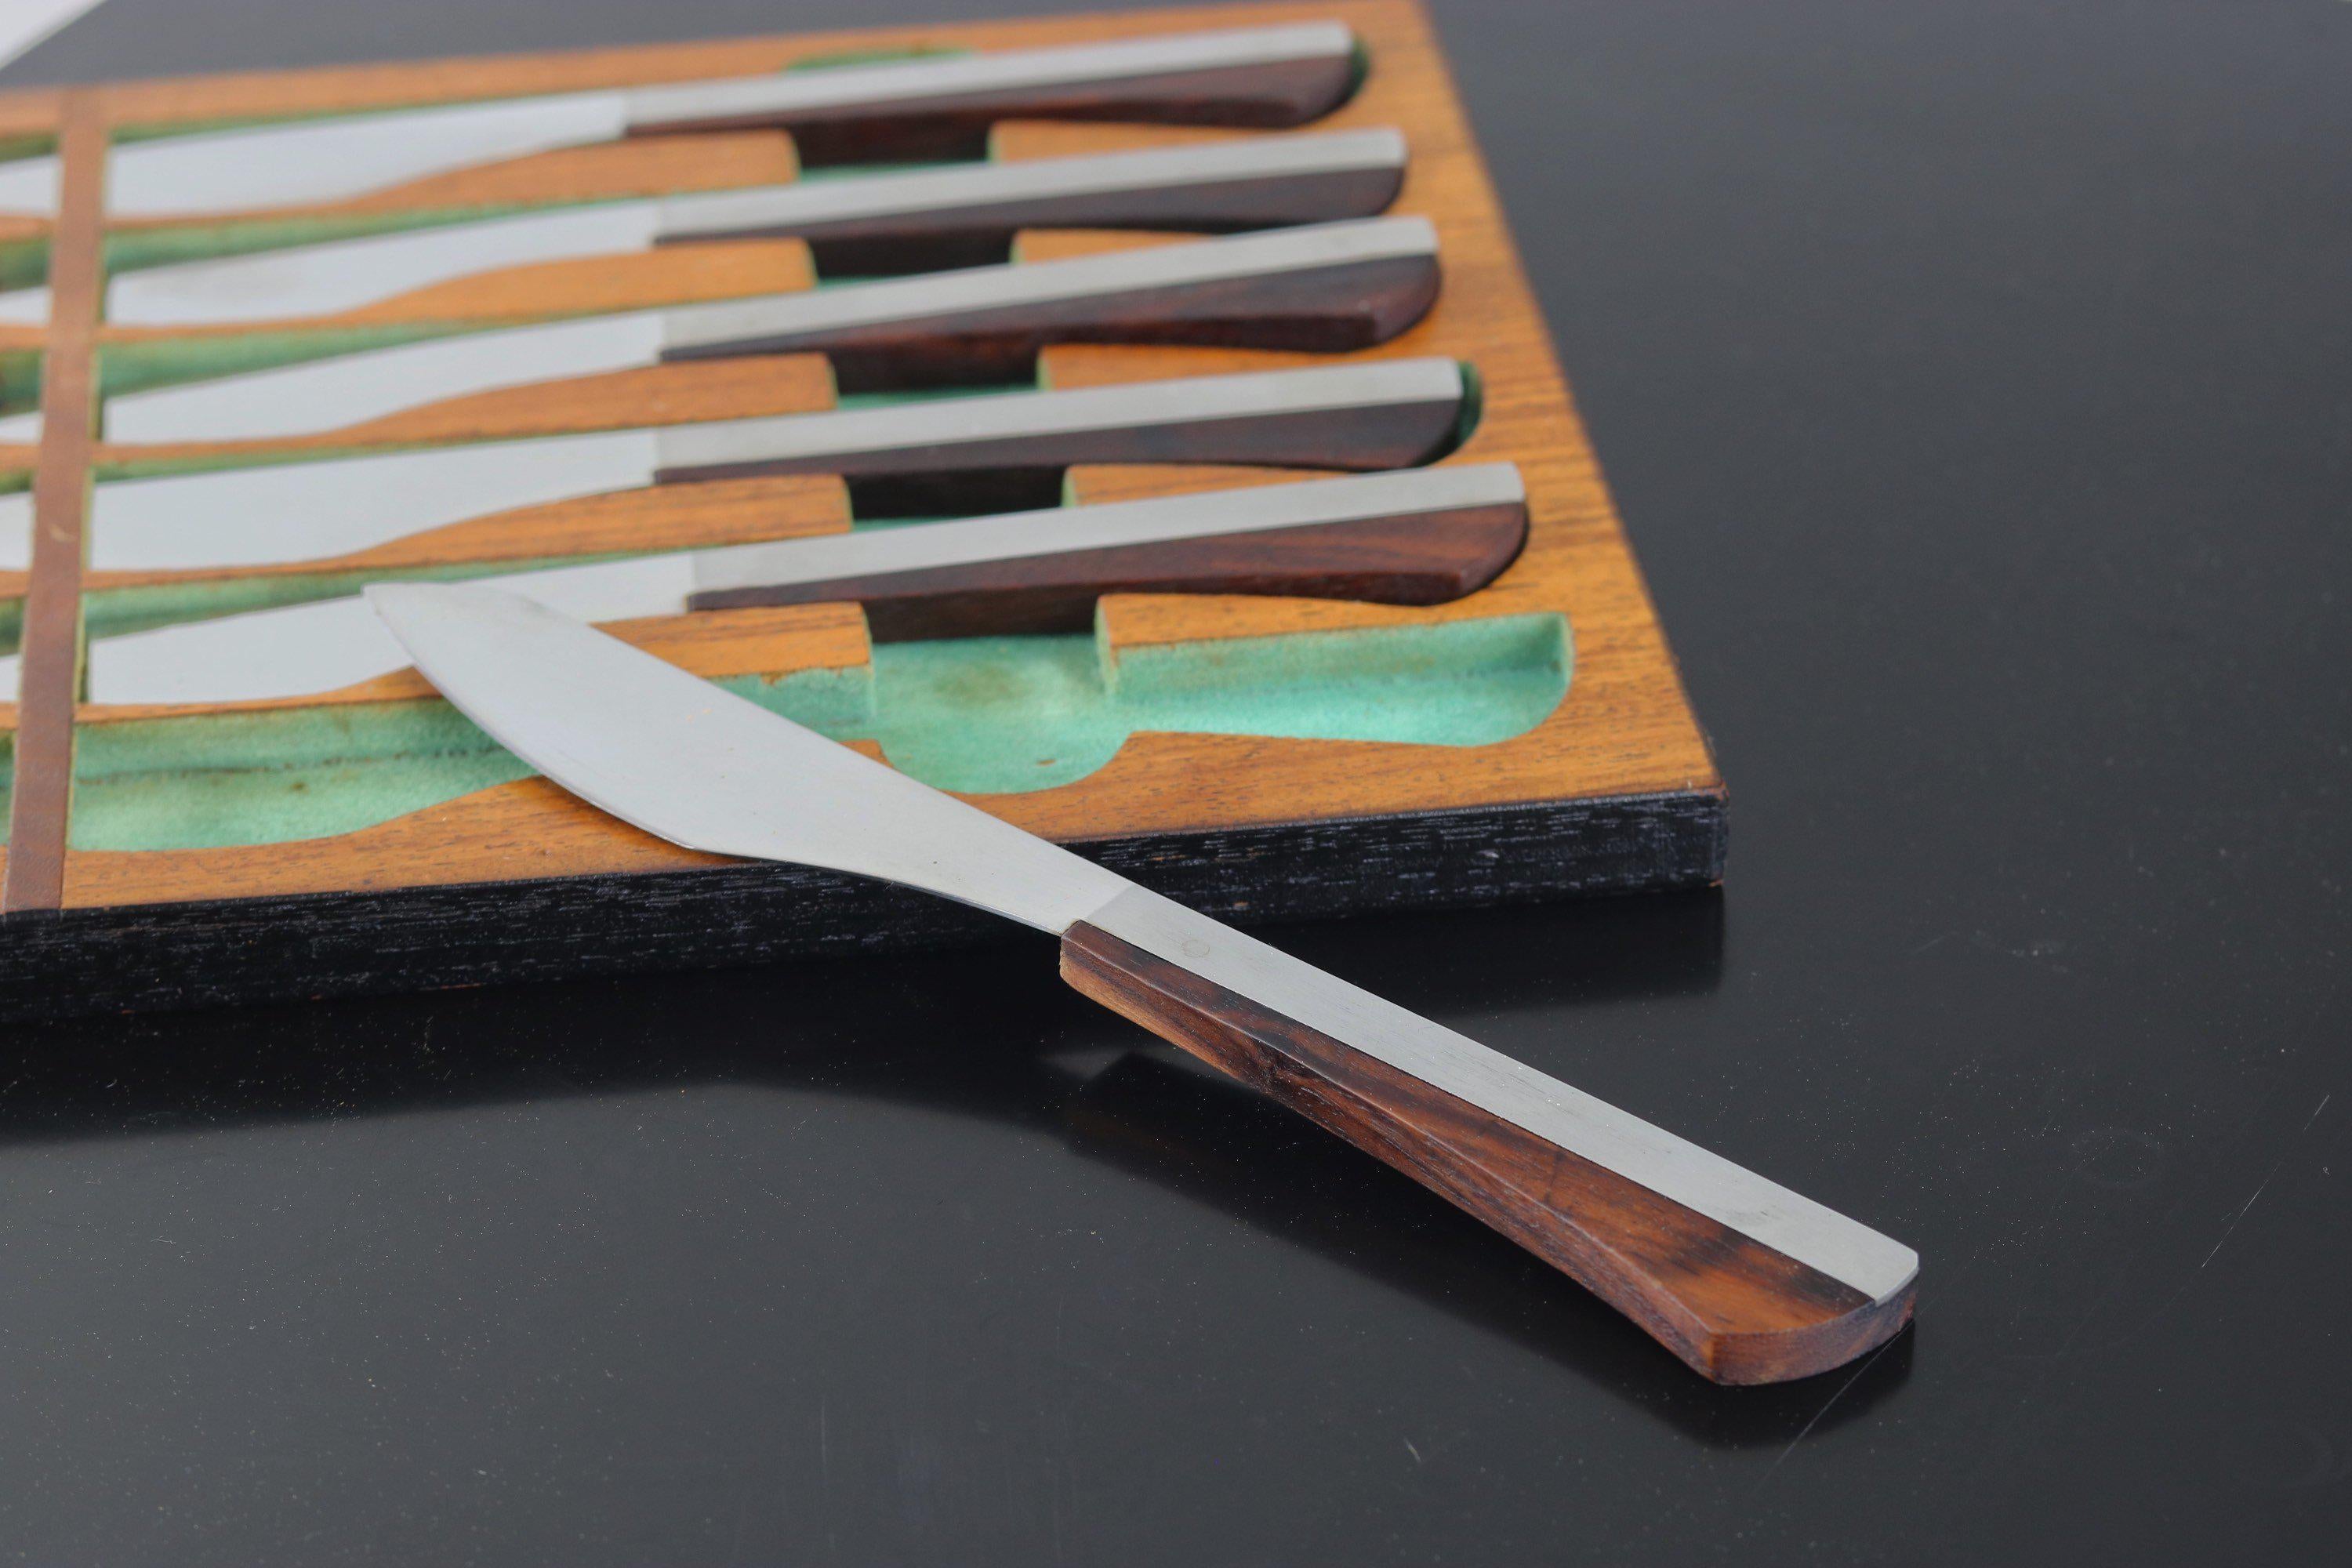 Eye-catching cutlery as art! The set of six knives are constructed with rosewood handles wrapping stainless metal blades made in Japan. The case for the knives can stow in your drawer or better yet mount on your wall for display with it's original